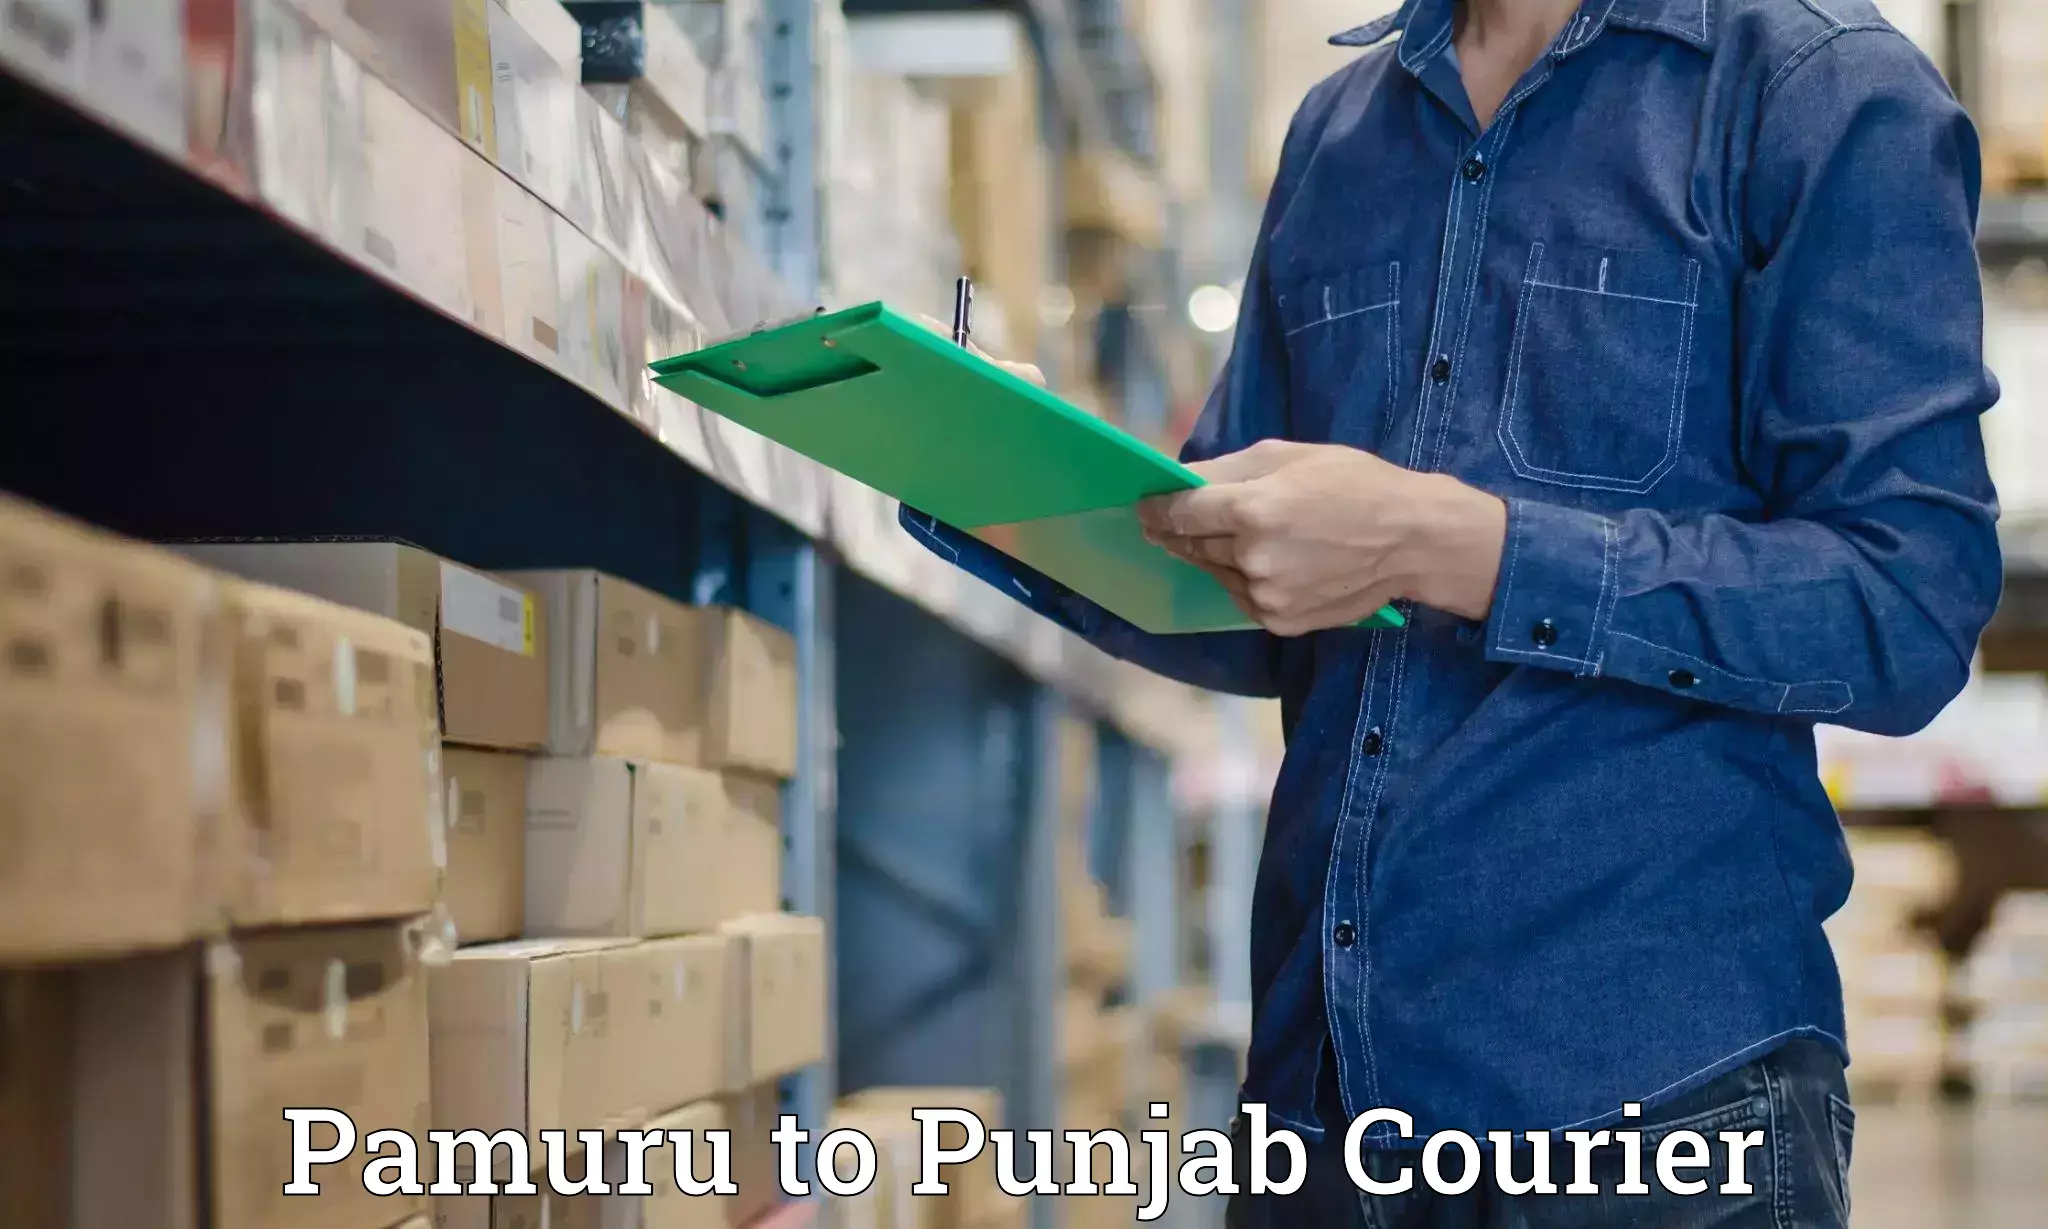 Express delivery capabilities Pamuru to Patiala